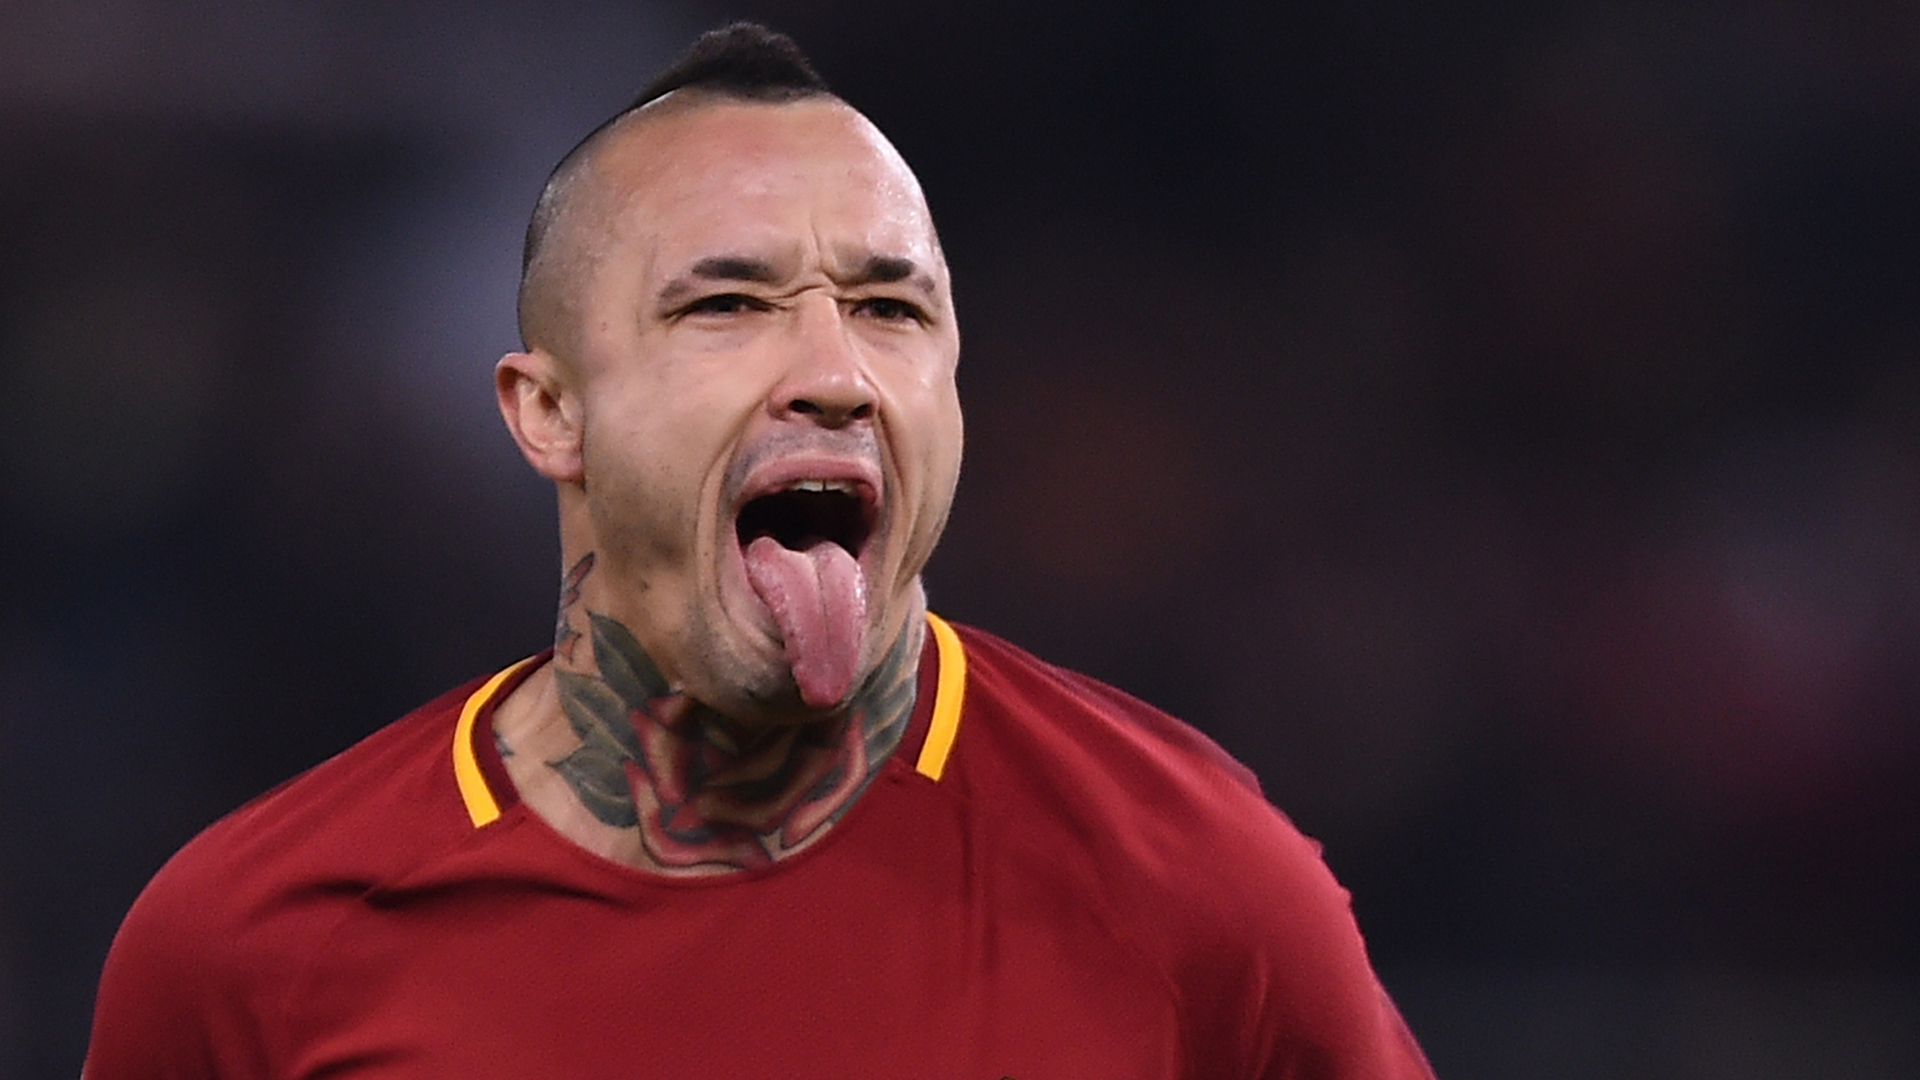 Nainggolan would leave Roma dressing room to smoke with the assistant manager, reveals Castan